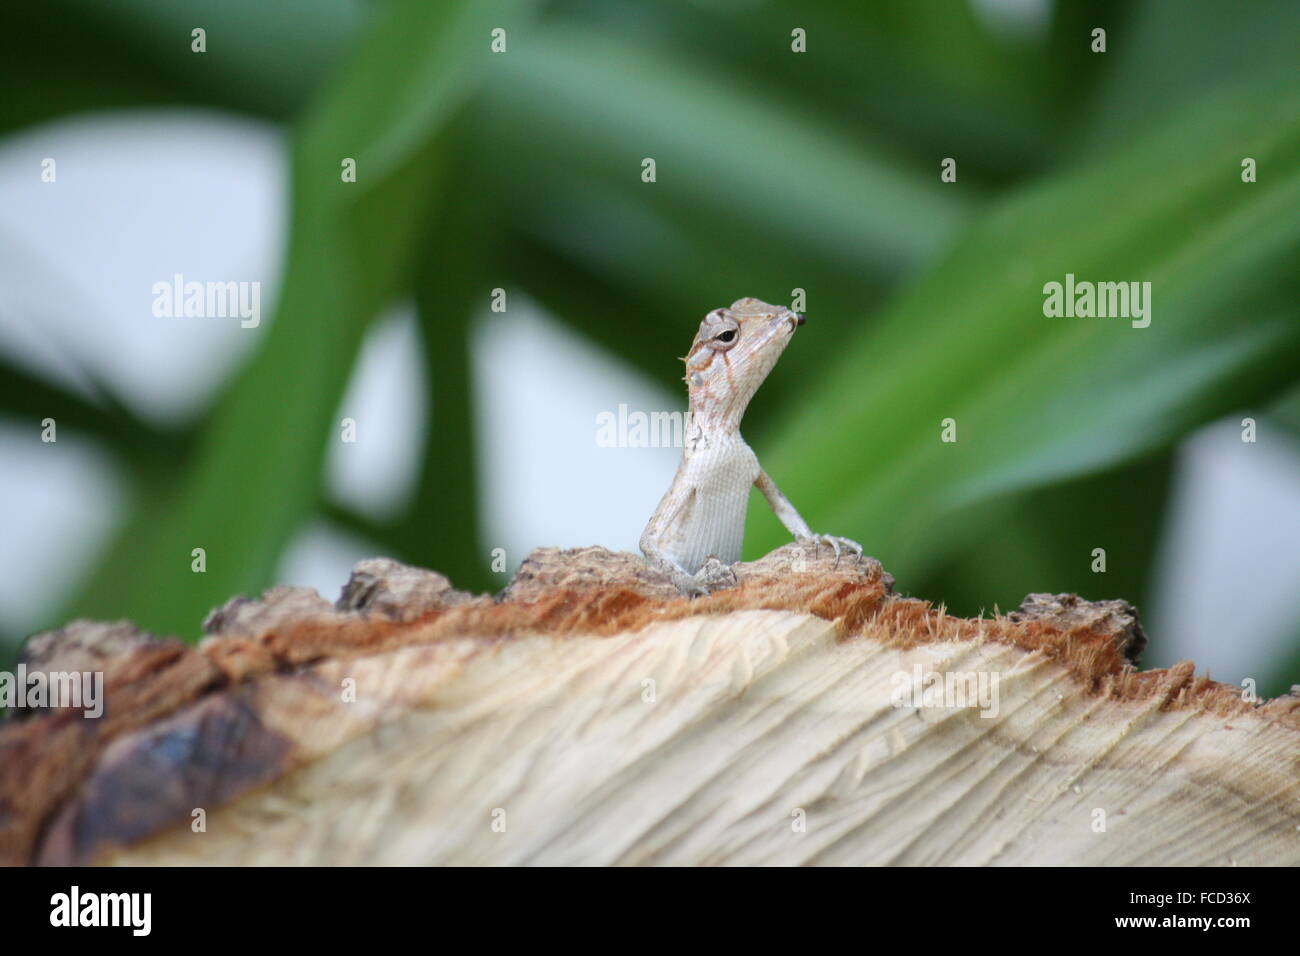 Small Lizard With Head Up Stock Photo